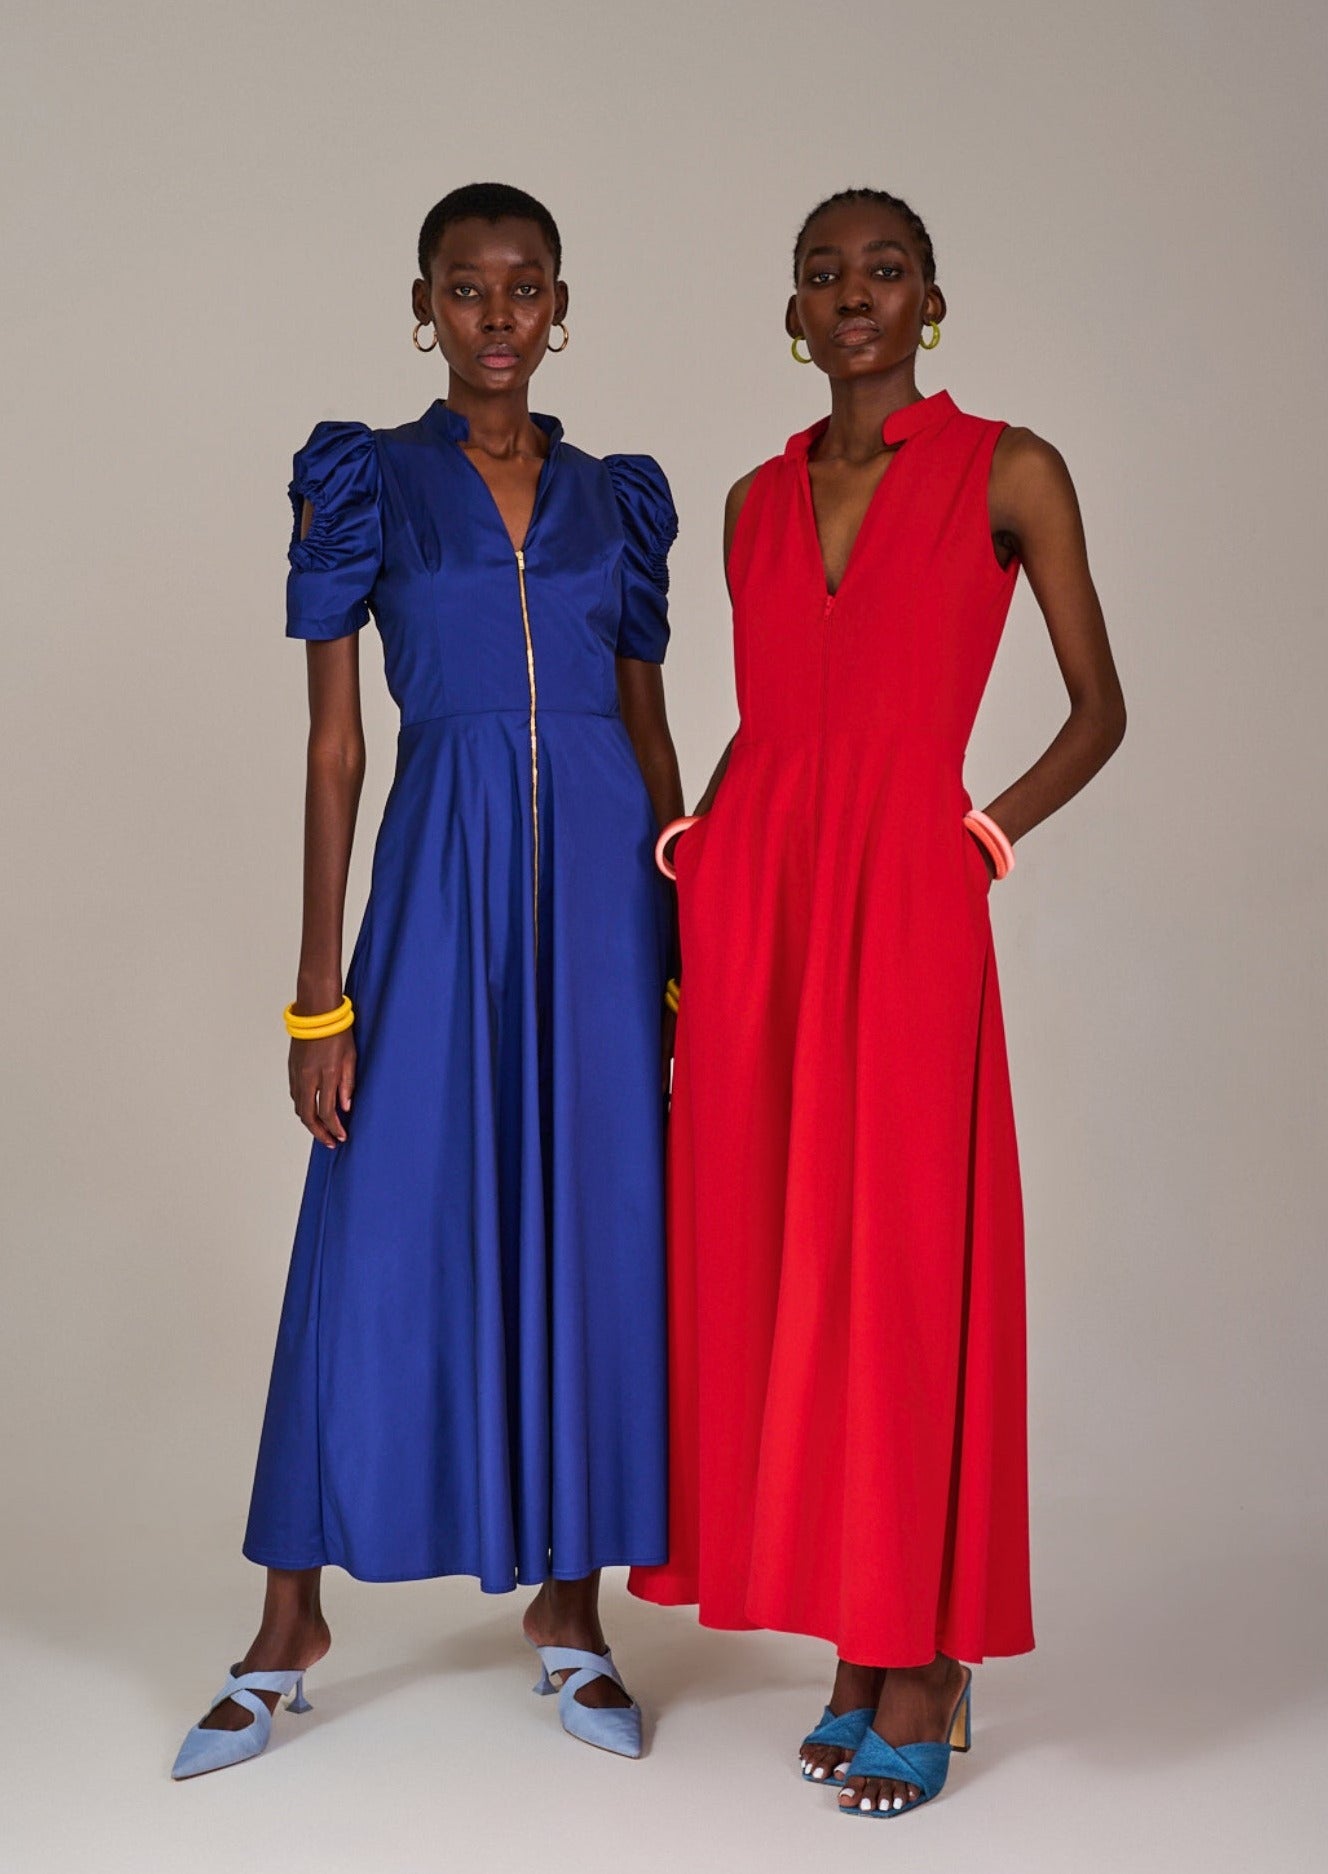 Model posing with hands in pocket wearing the Bokaap Orange Bamboo Dress, posing together with a model in the Nines Blue Dress by KAHINDO